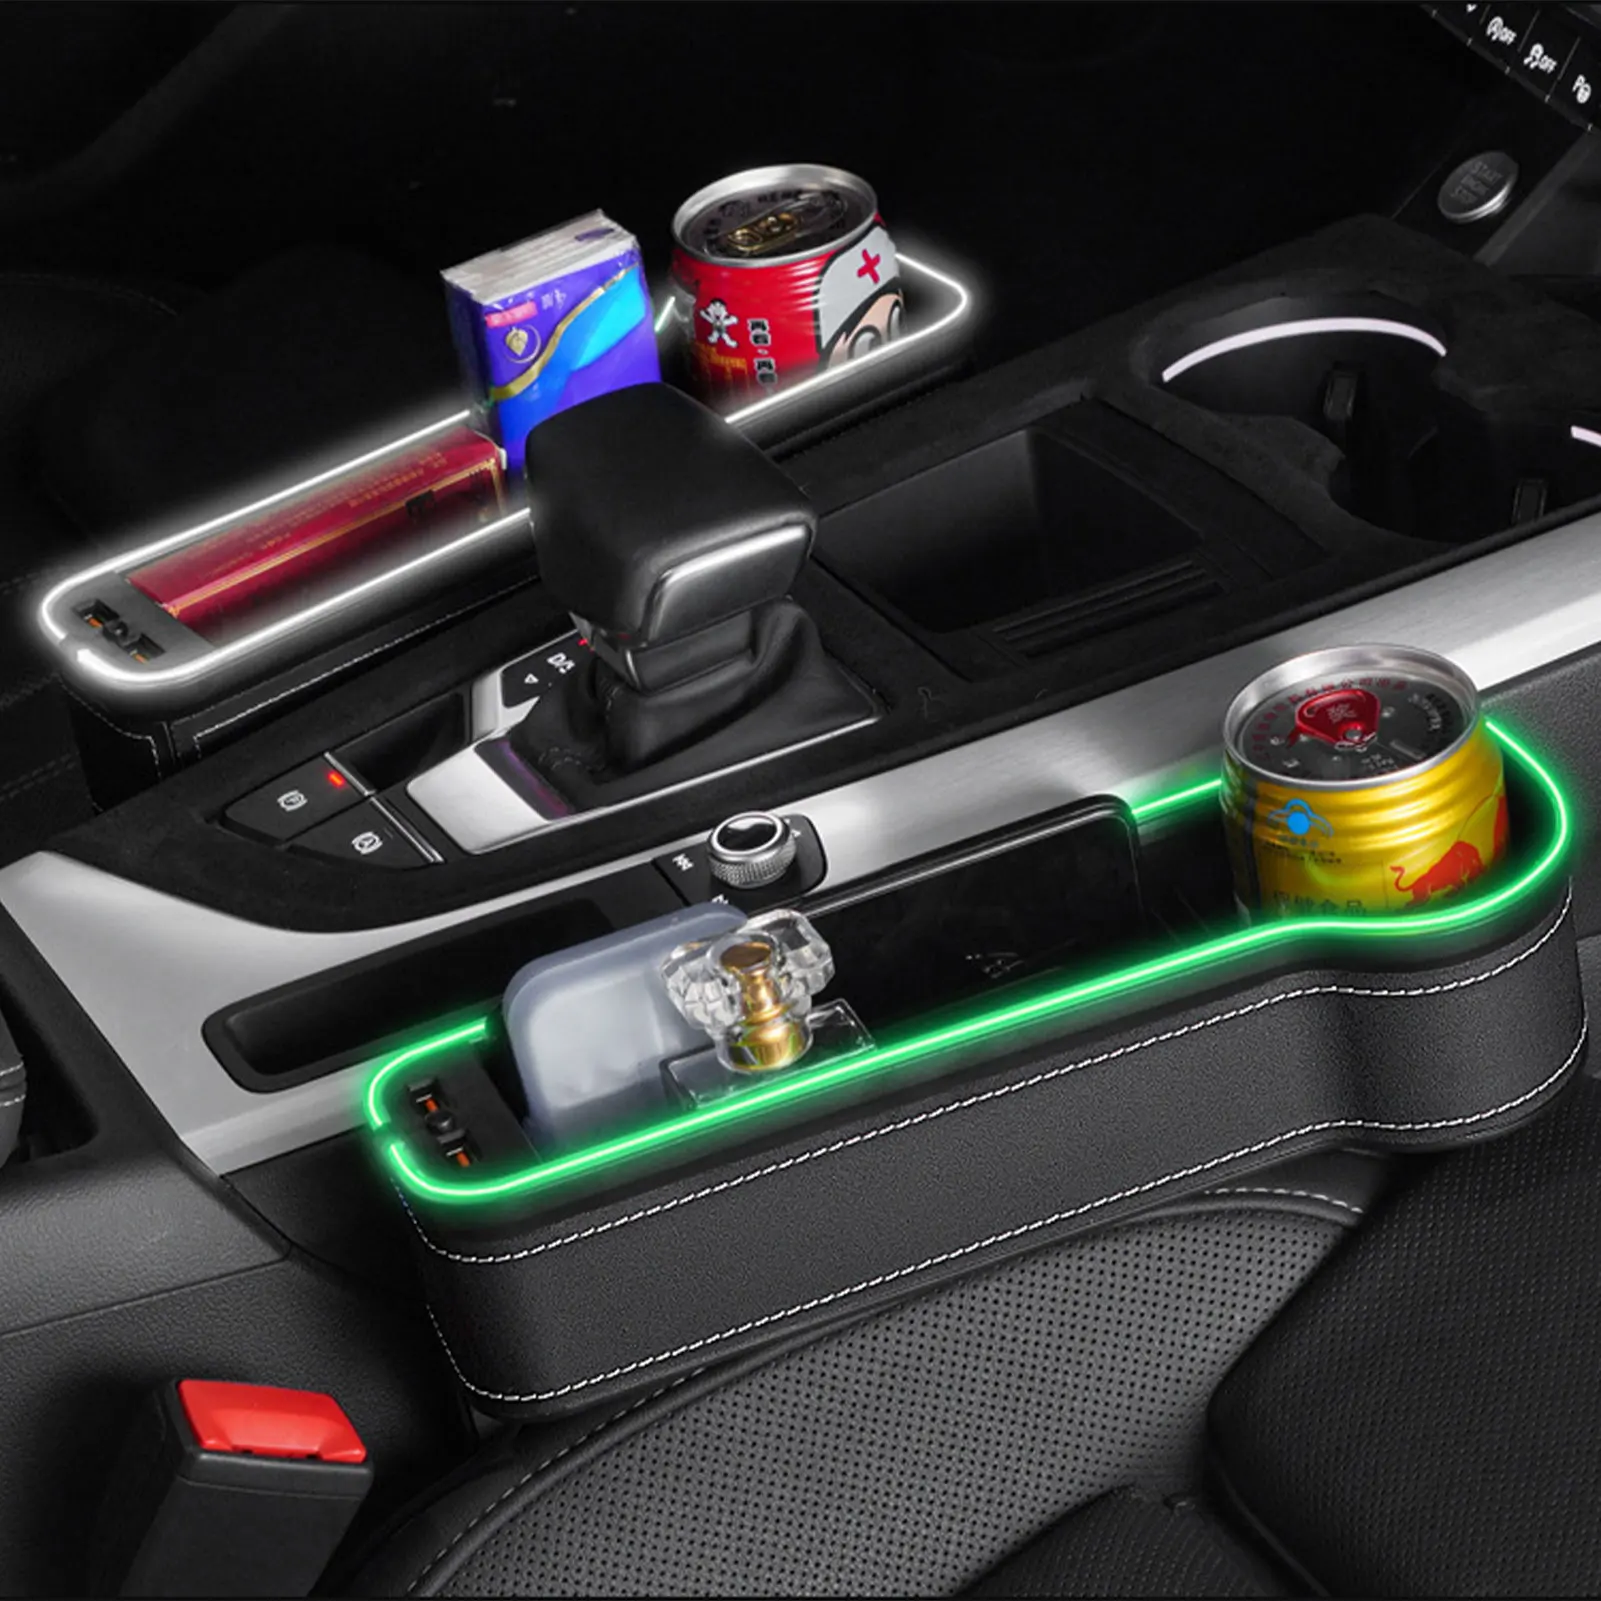 

Automotive LED Car Seat Gap Filler Organizers with Dual USB Charging Ports Front Seat Storage Box for Bottles Cups Sunglasses